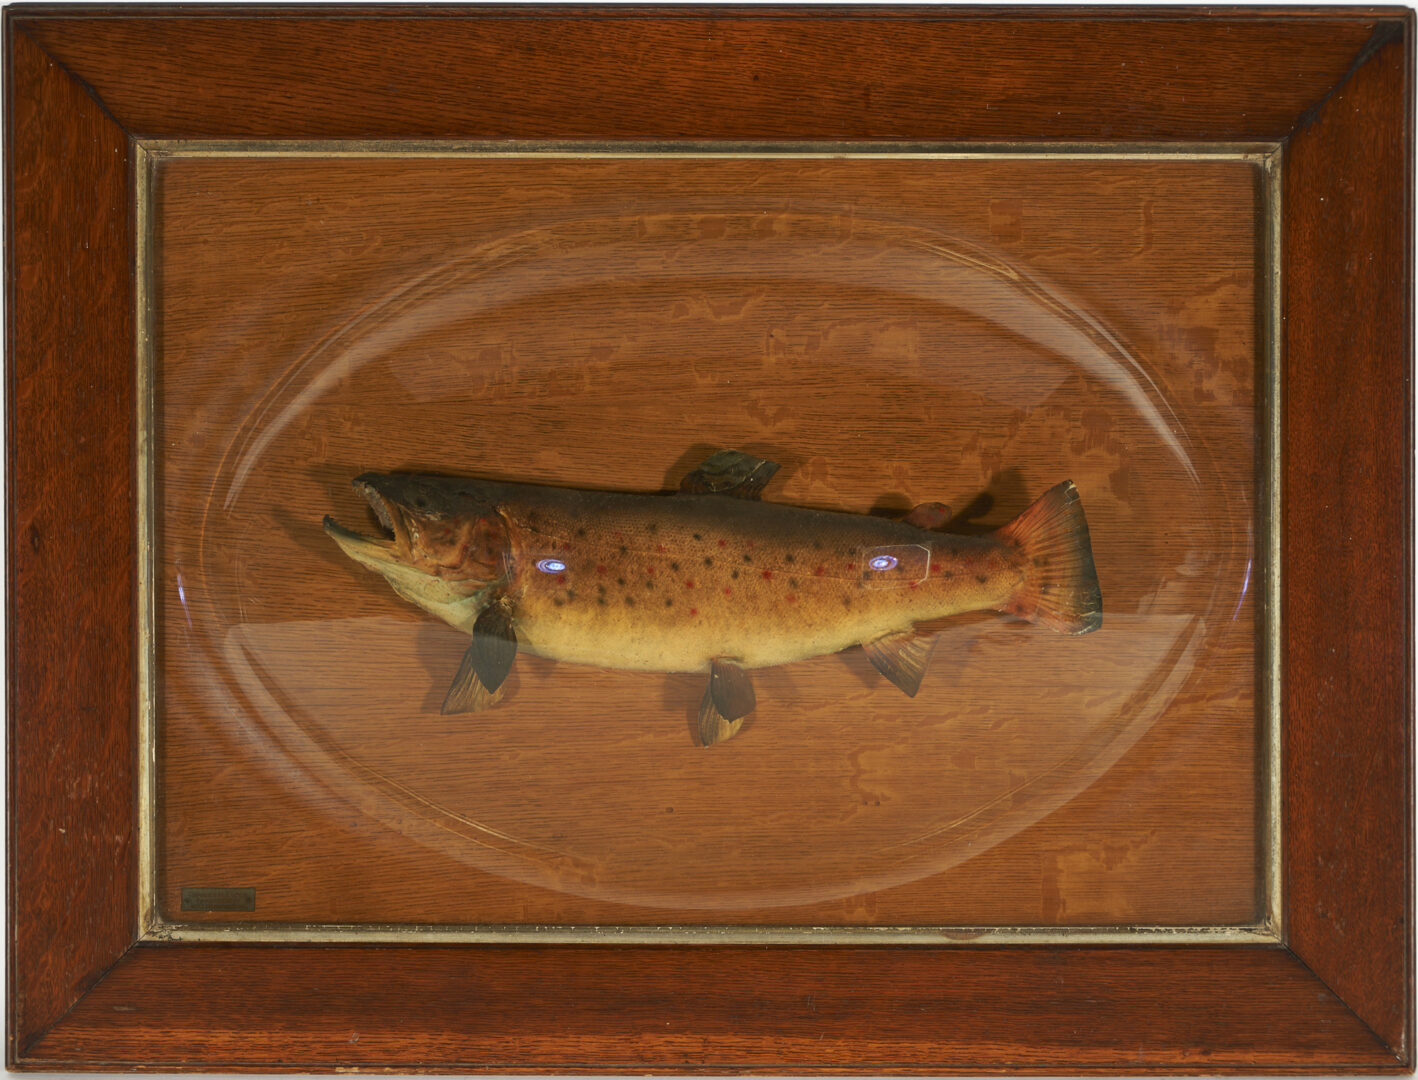 Lot 631: Taxidermy Fish by Charles H. Heldon, Williamsport, PA C. 1913